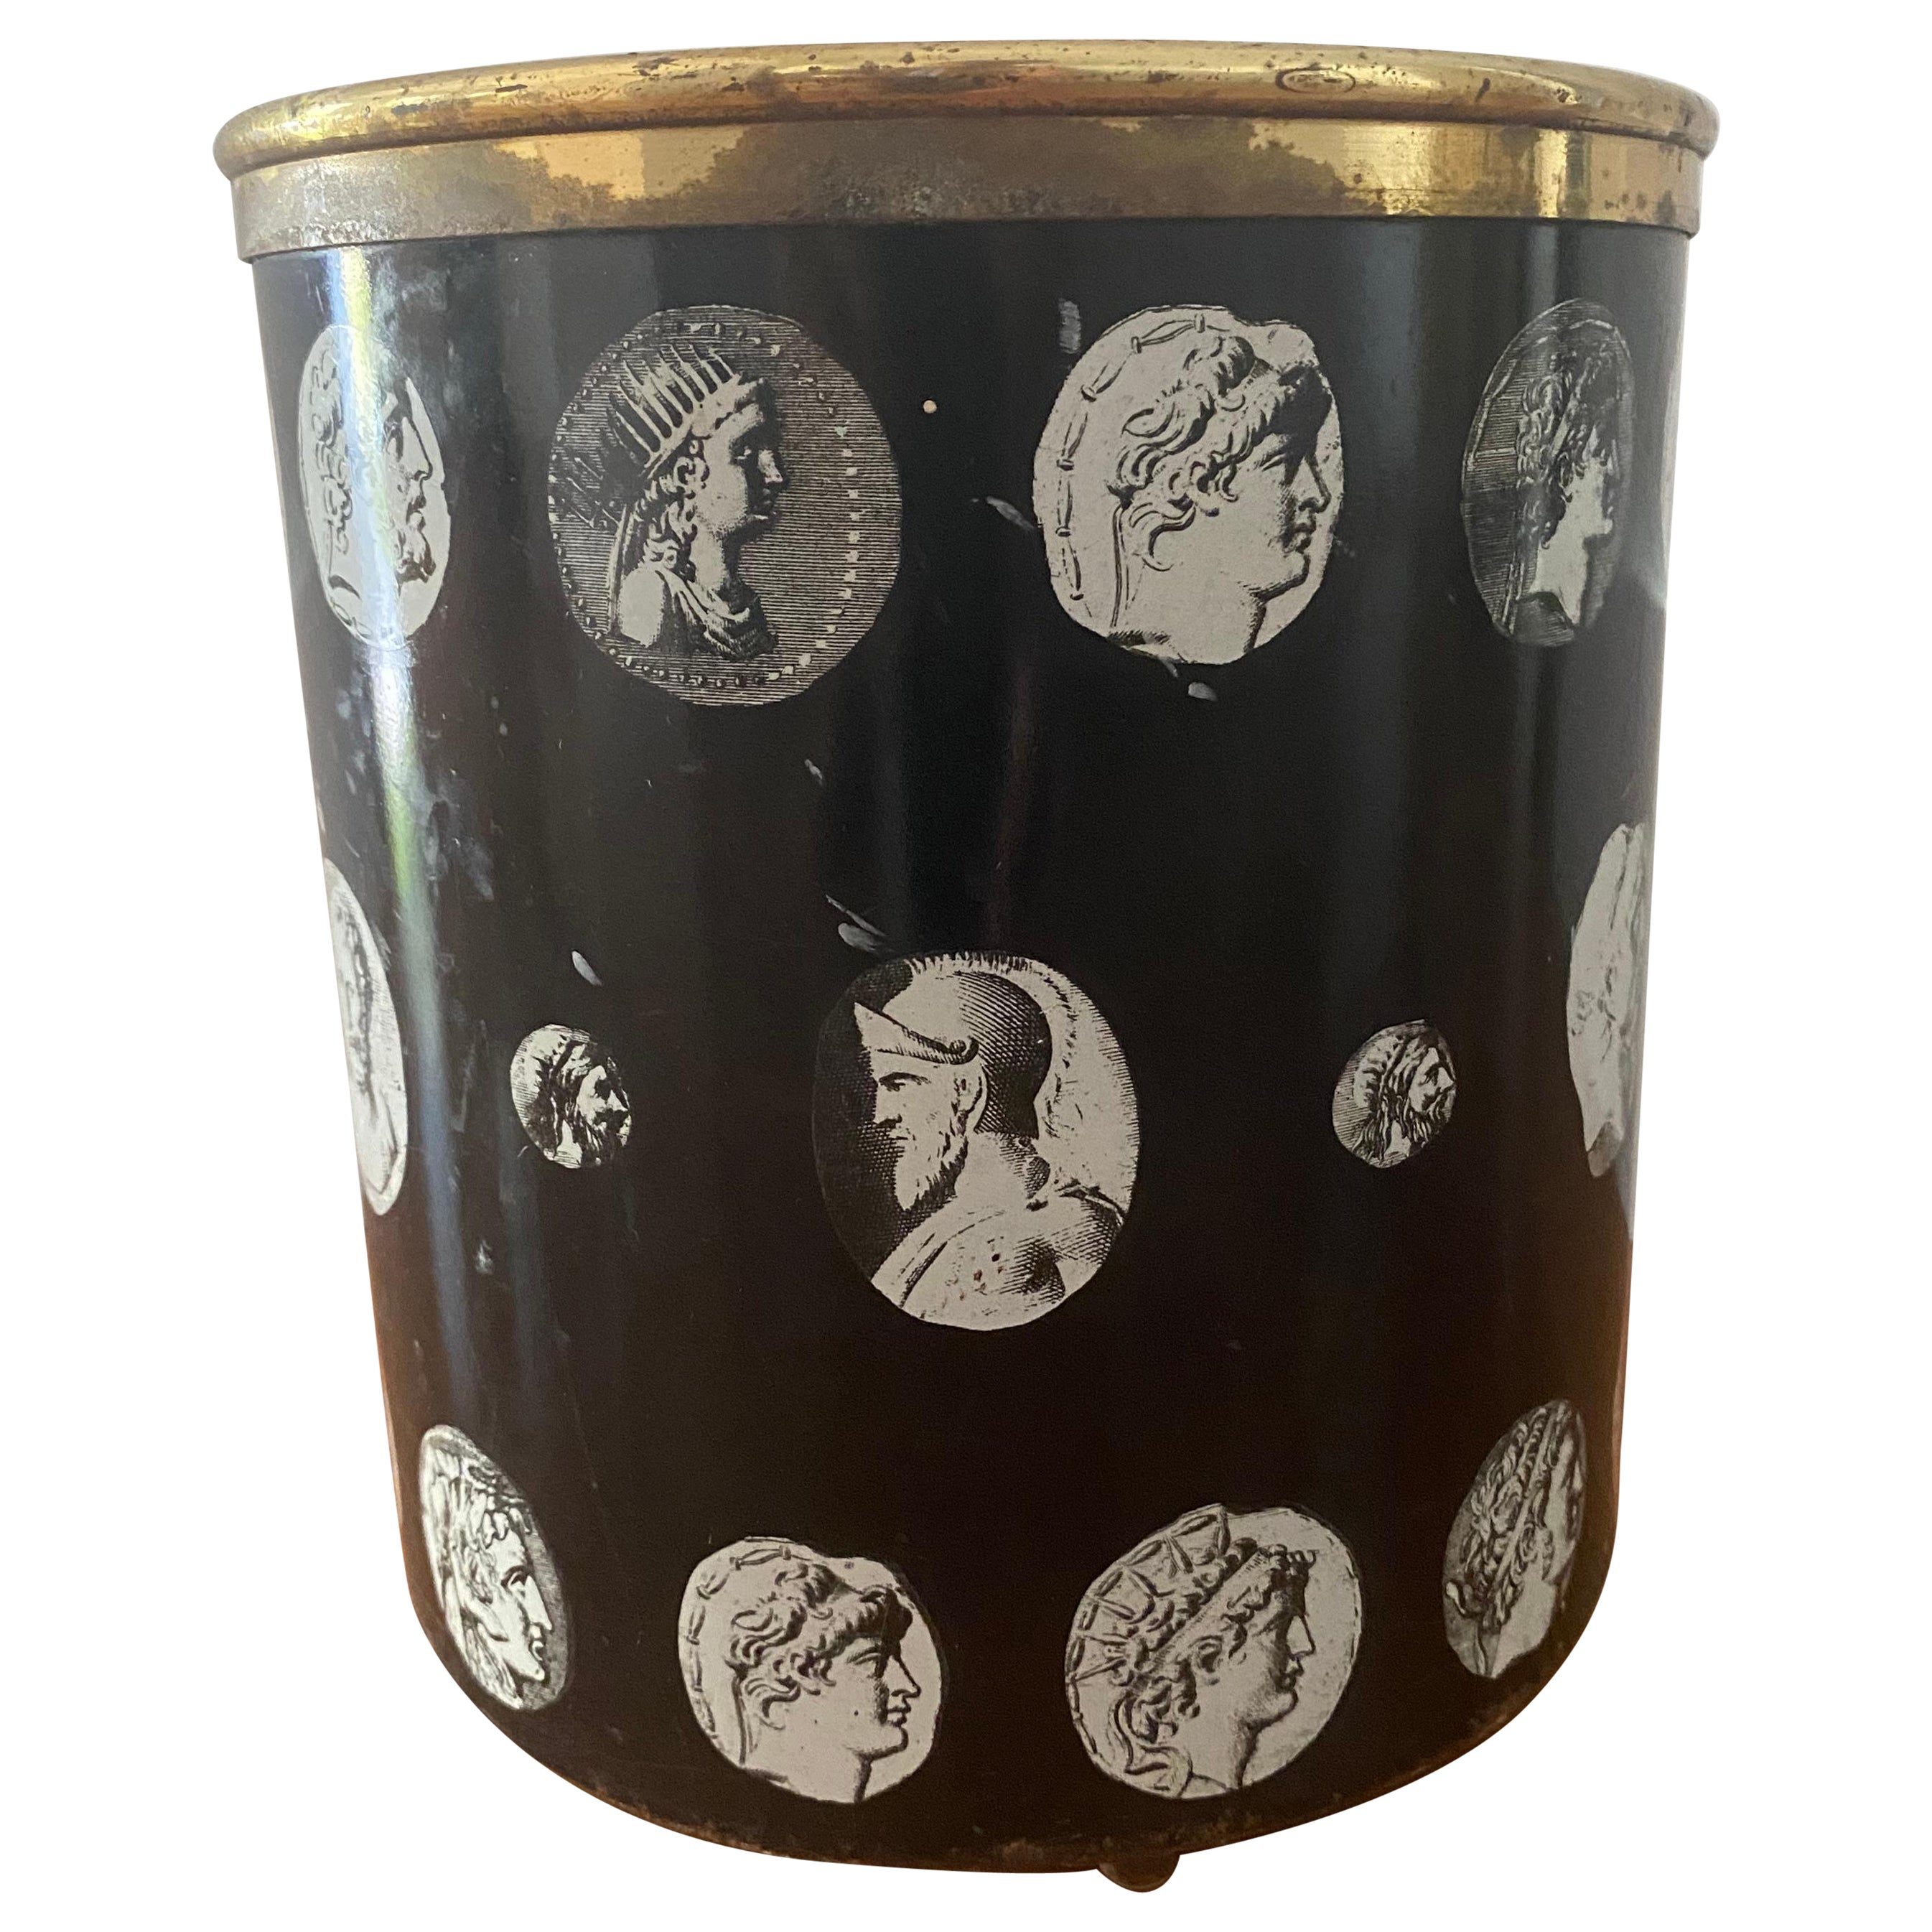 Vintage Fornasetti Cameo Cammei waste paper bin basket Italy mid century